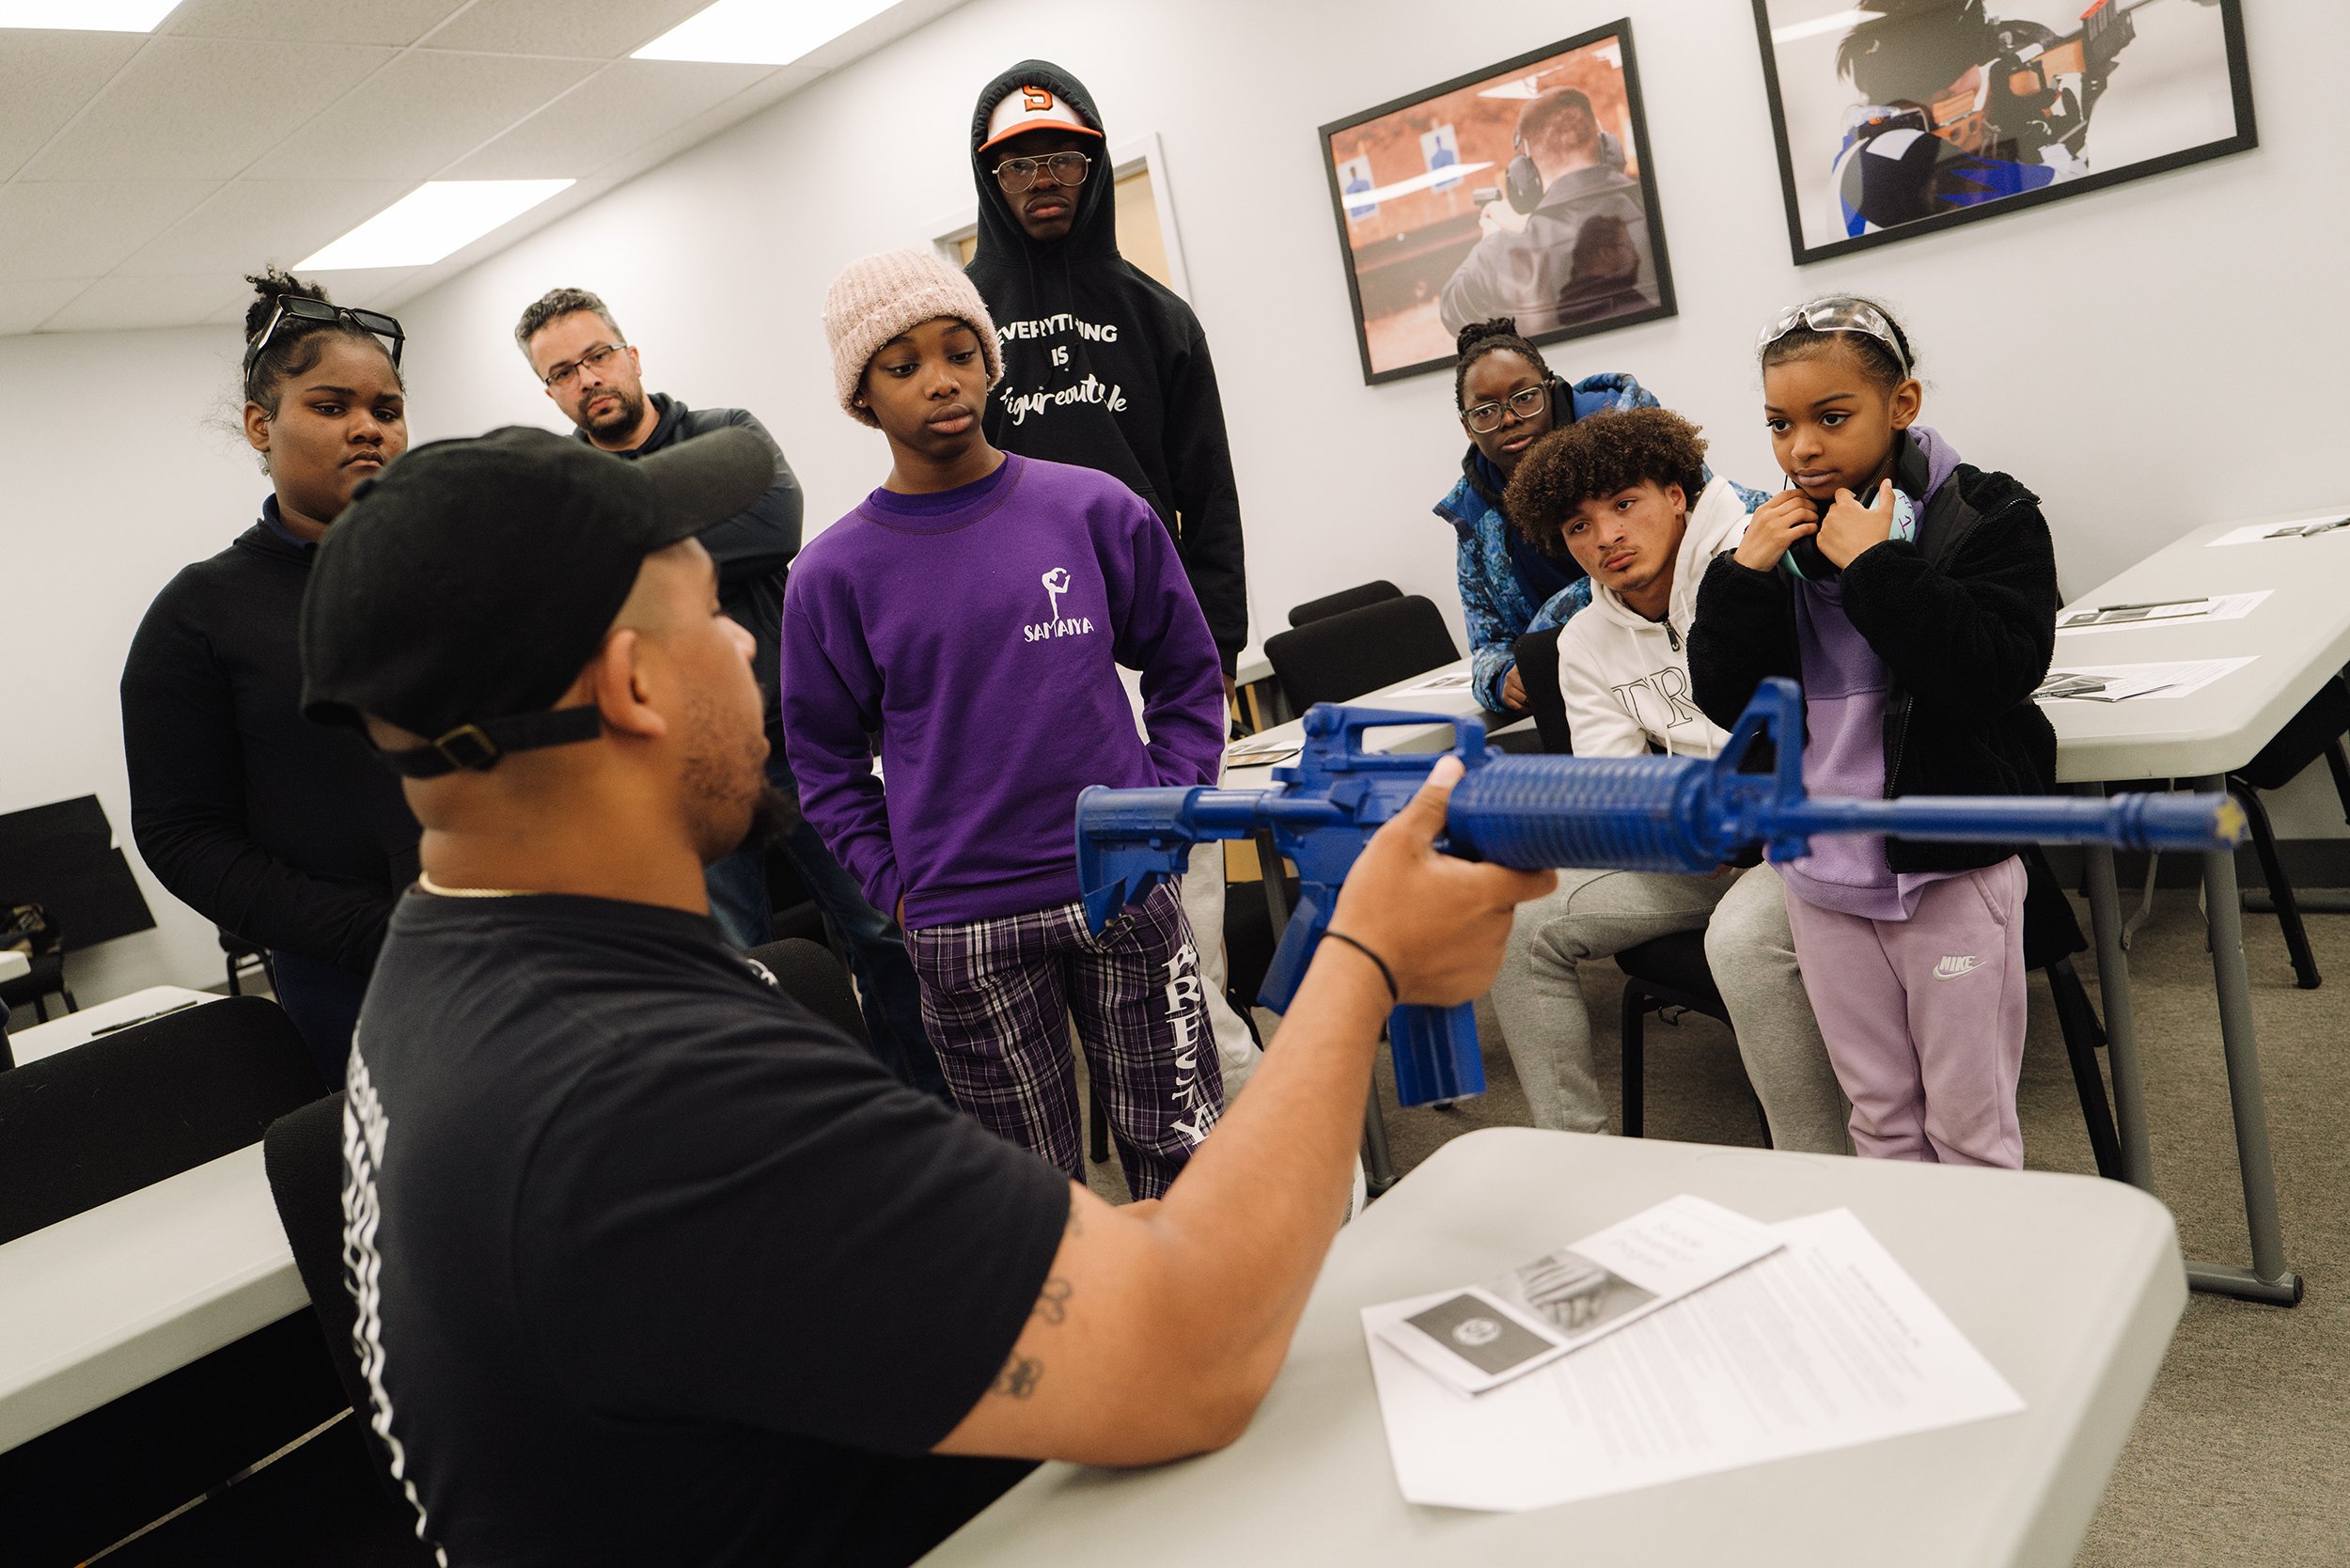  Donkor Minors demonstrates the proper positioning when handling a rifle in the firing range for better accuracy to his youth shooting team at Mass Firearms in Holliston, Mass. Members of the team are accompanied by family members and enjoy a fun str